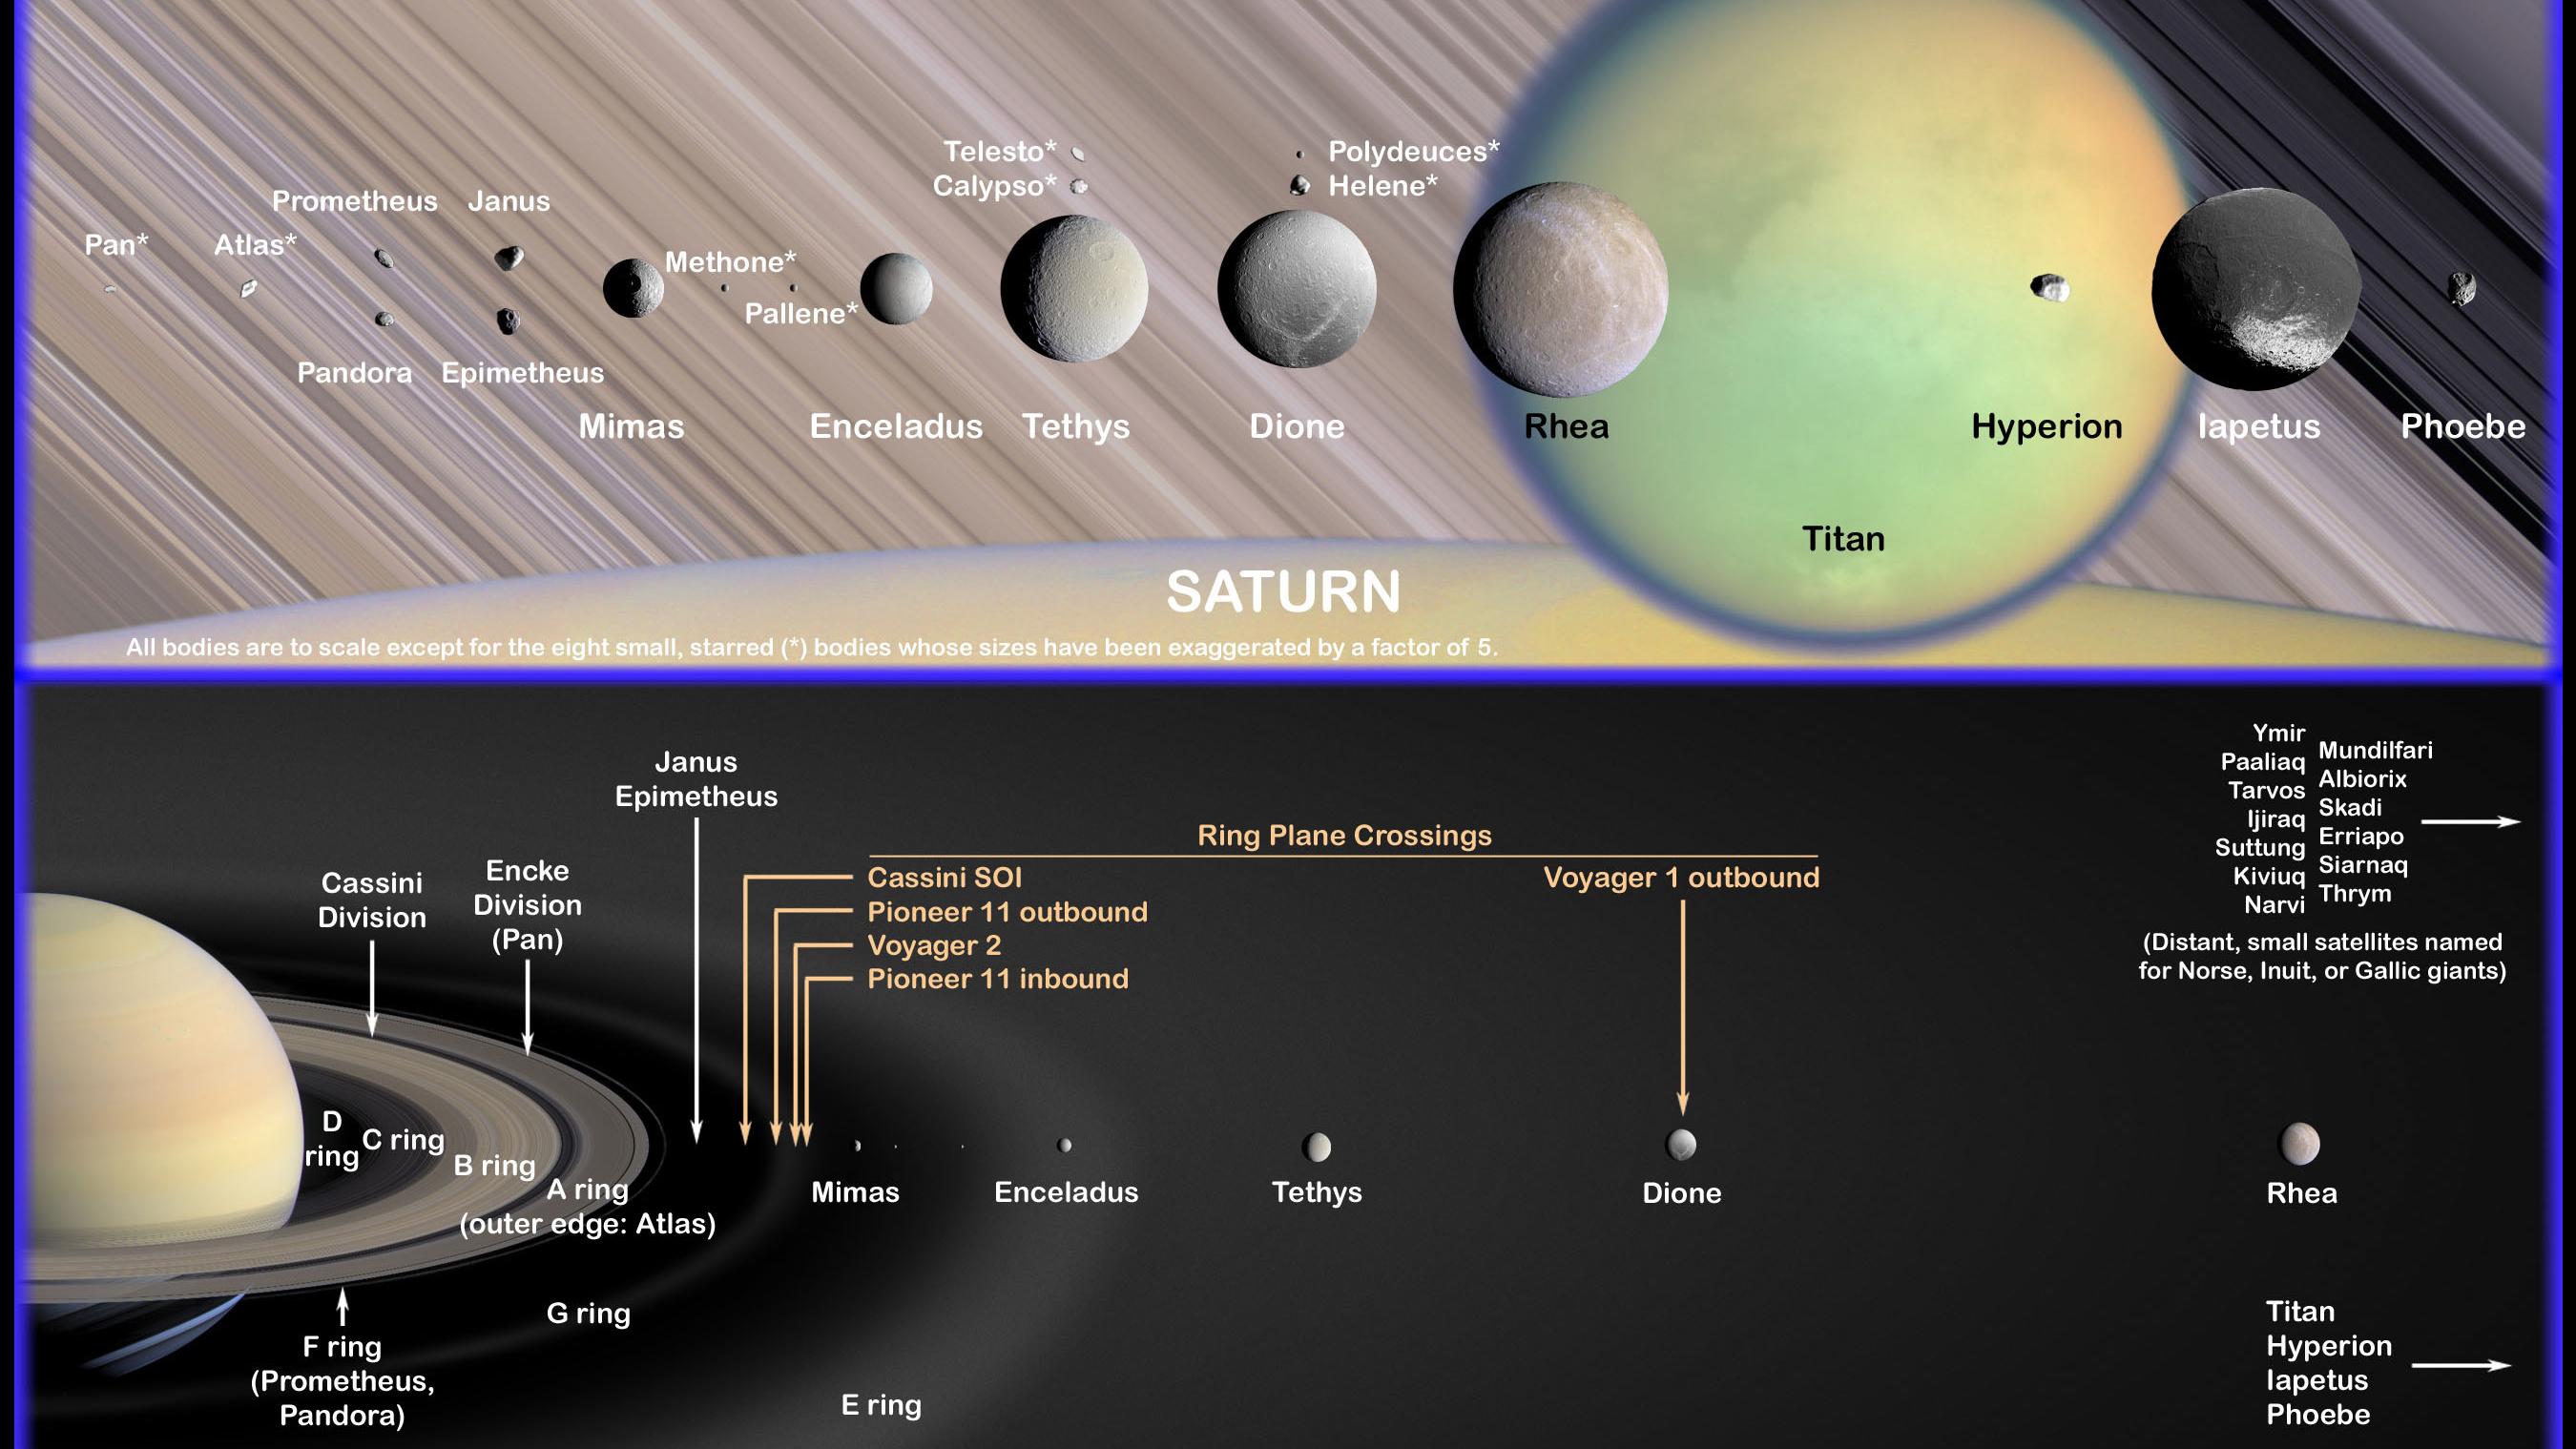 20 Fascinating Facts About The Planet Saturn - The Fact Site